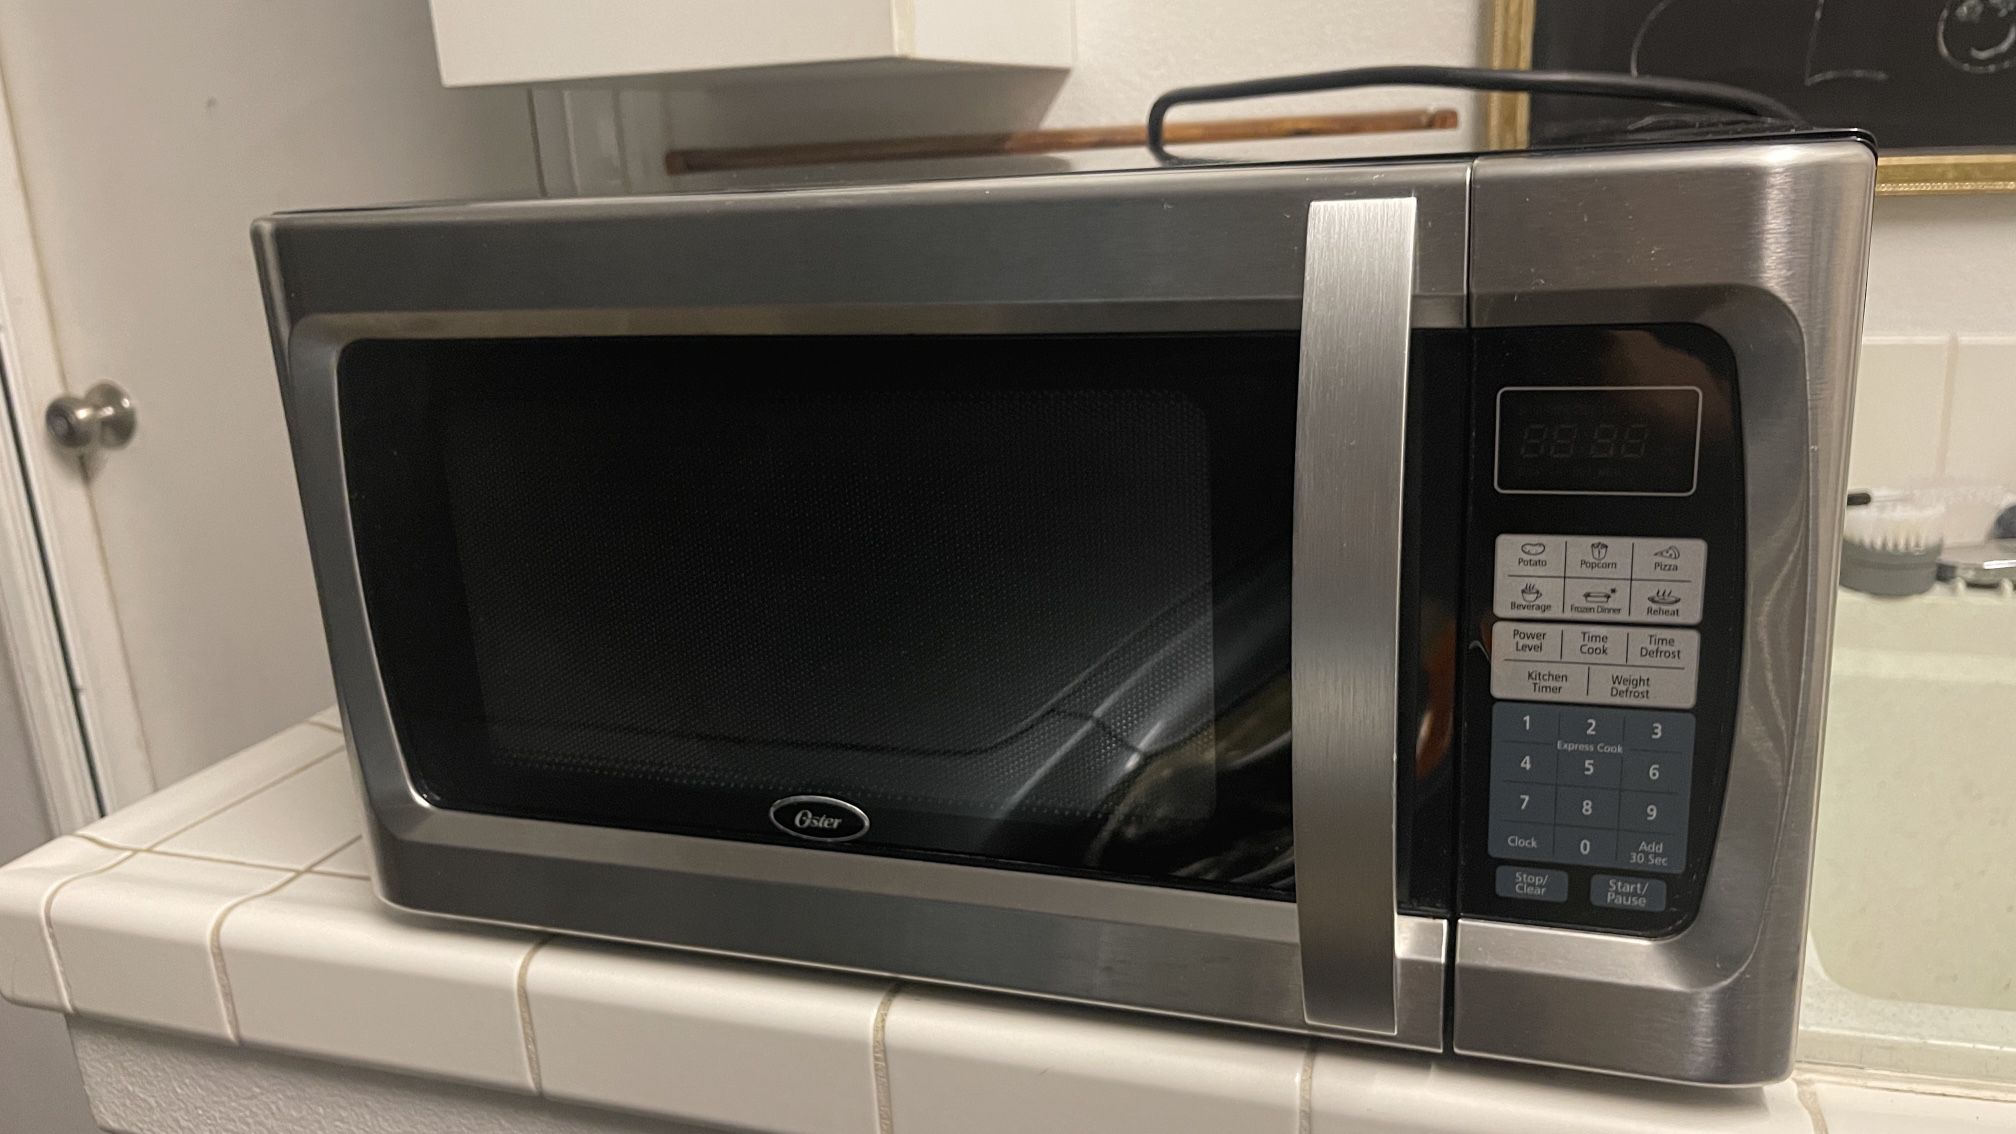 Oster 1100 watts microwave 